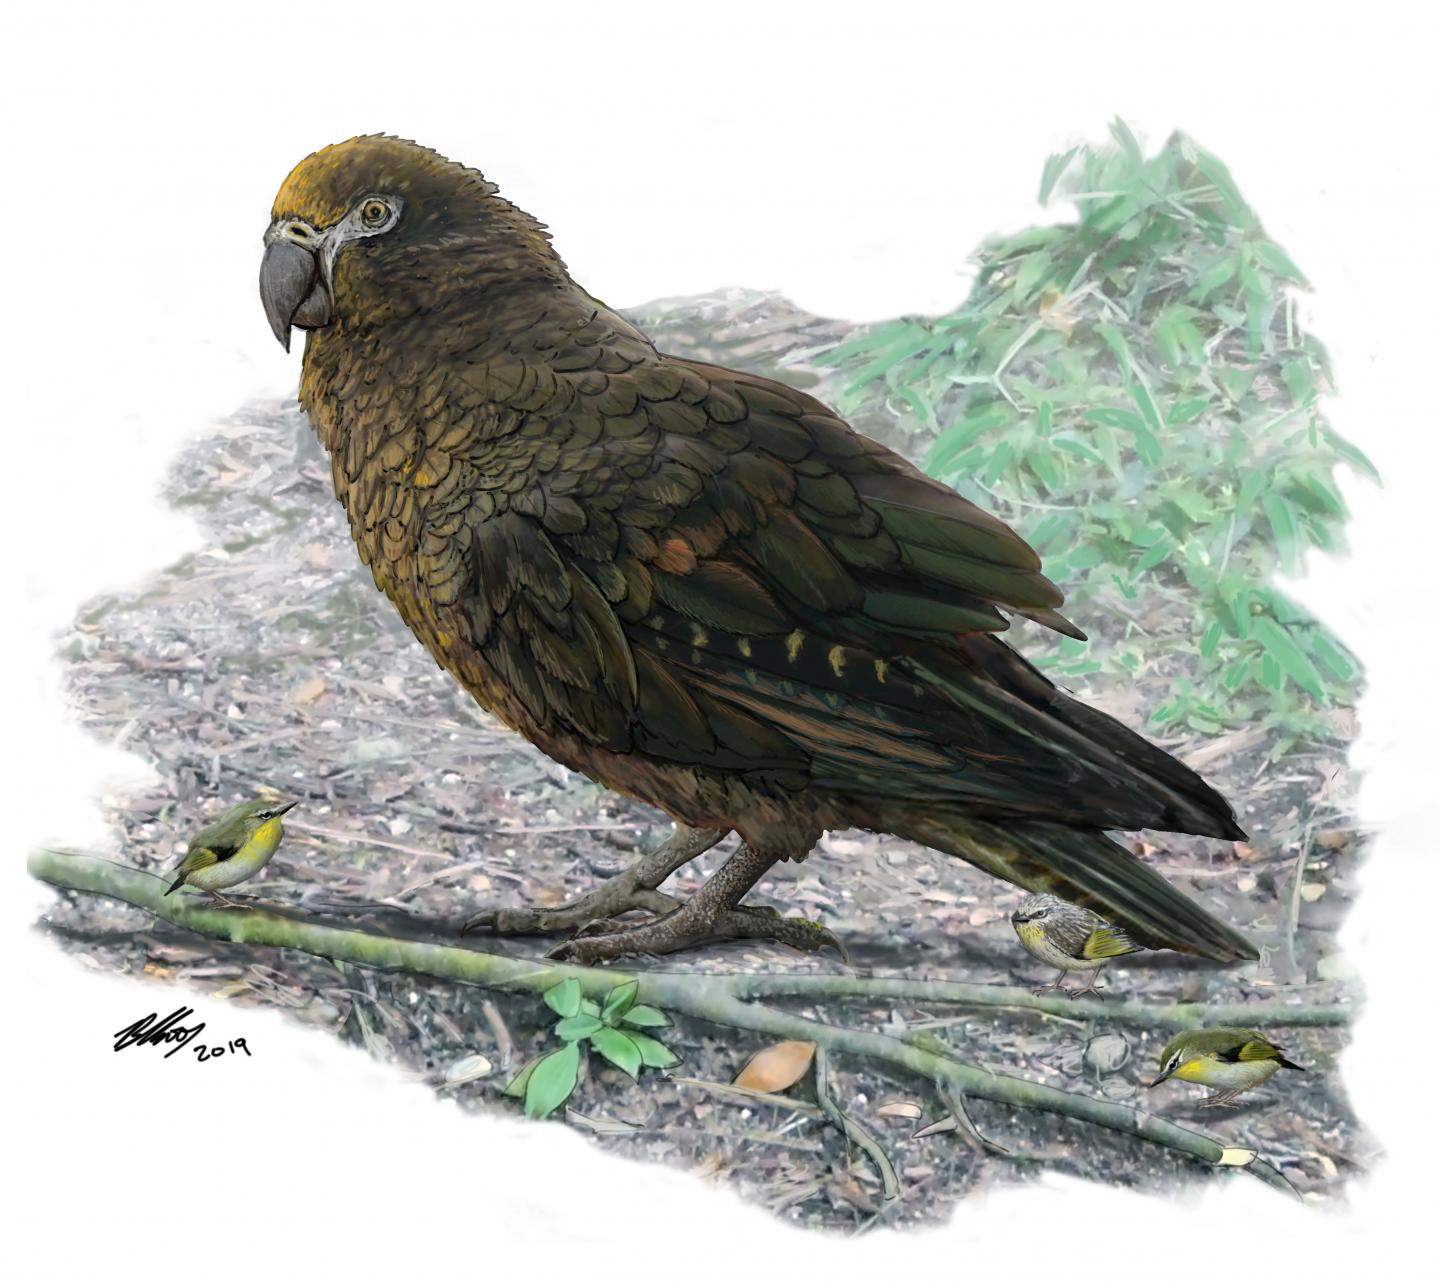 Reconstruction of the Giant Parrot 'Heracles Inexpectatus'